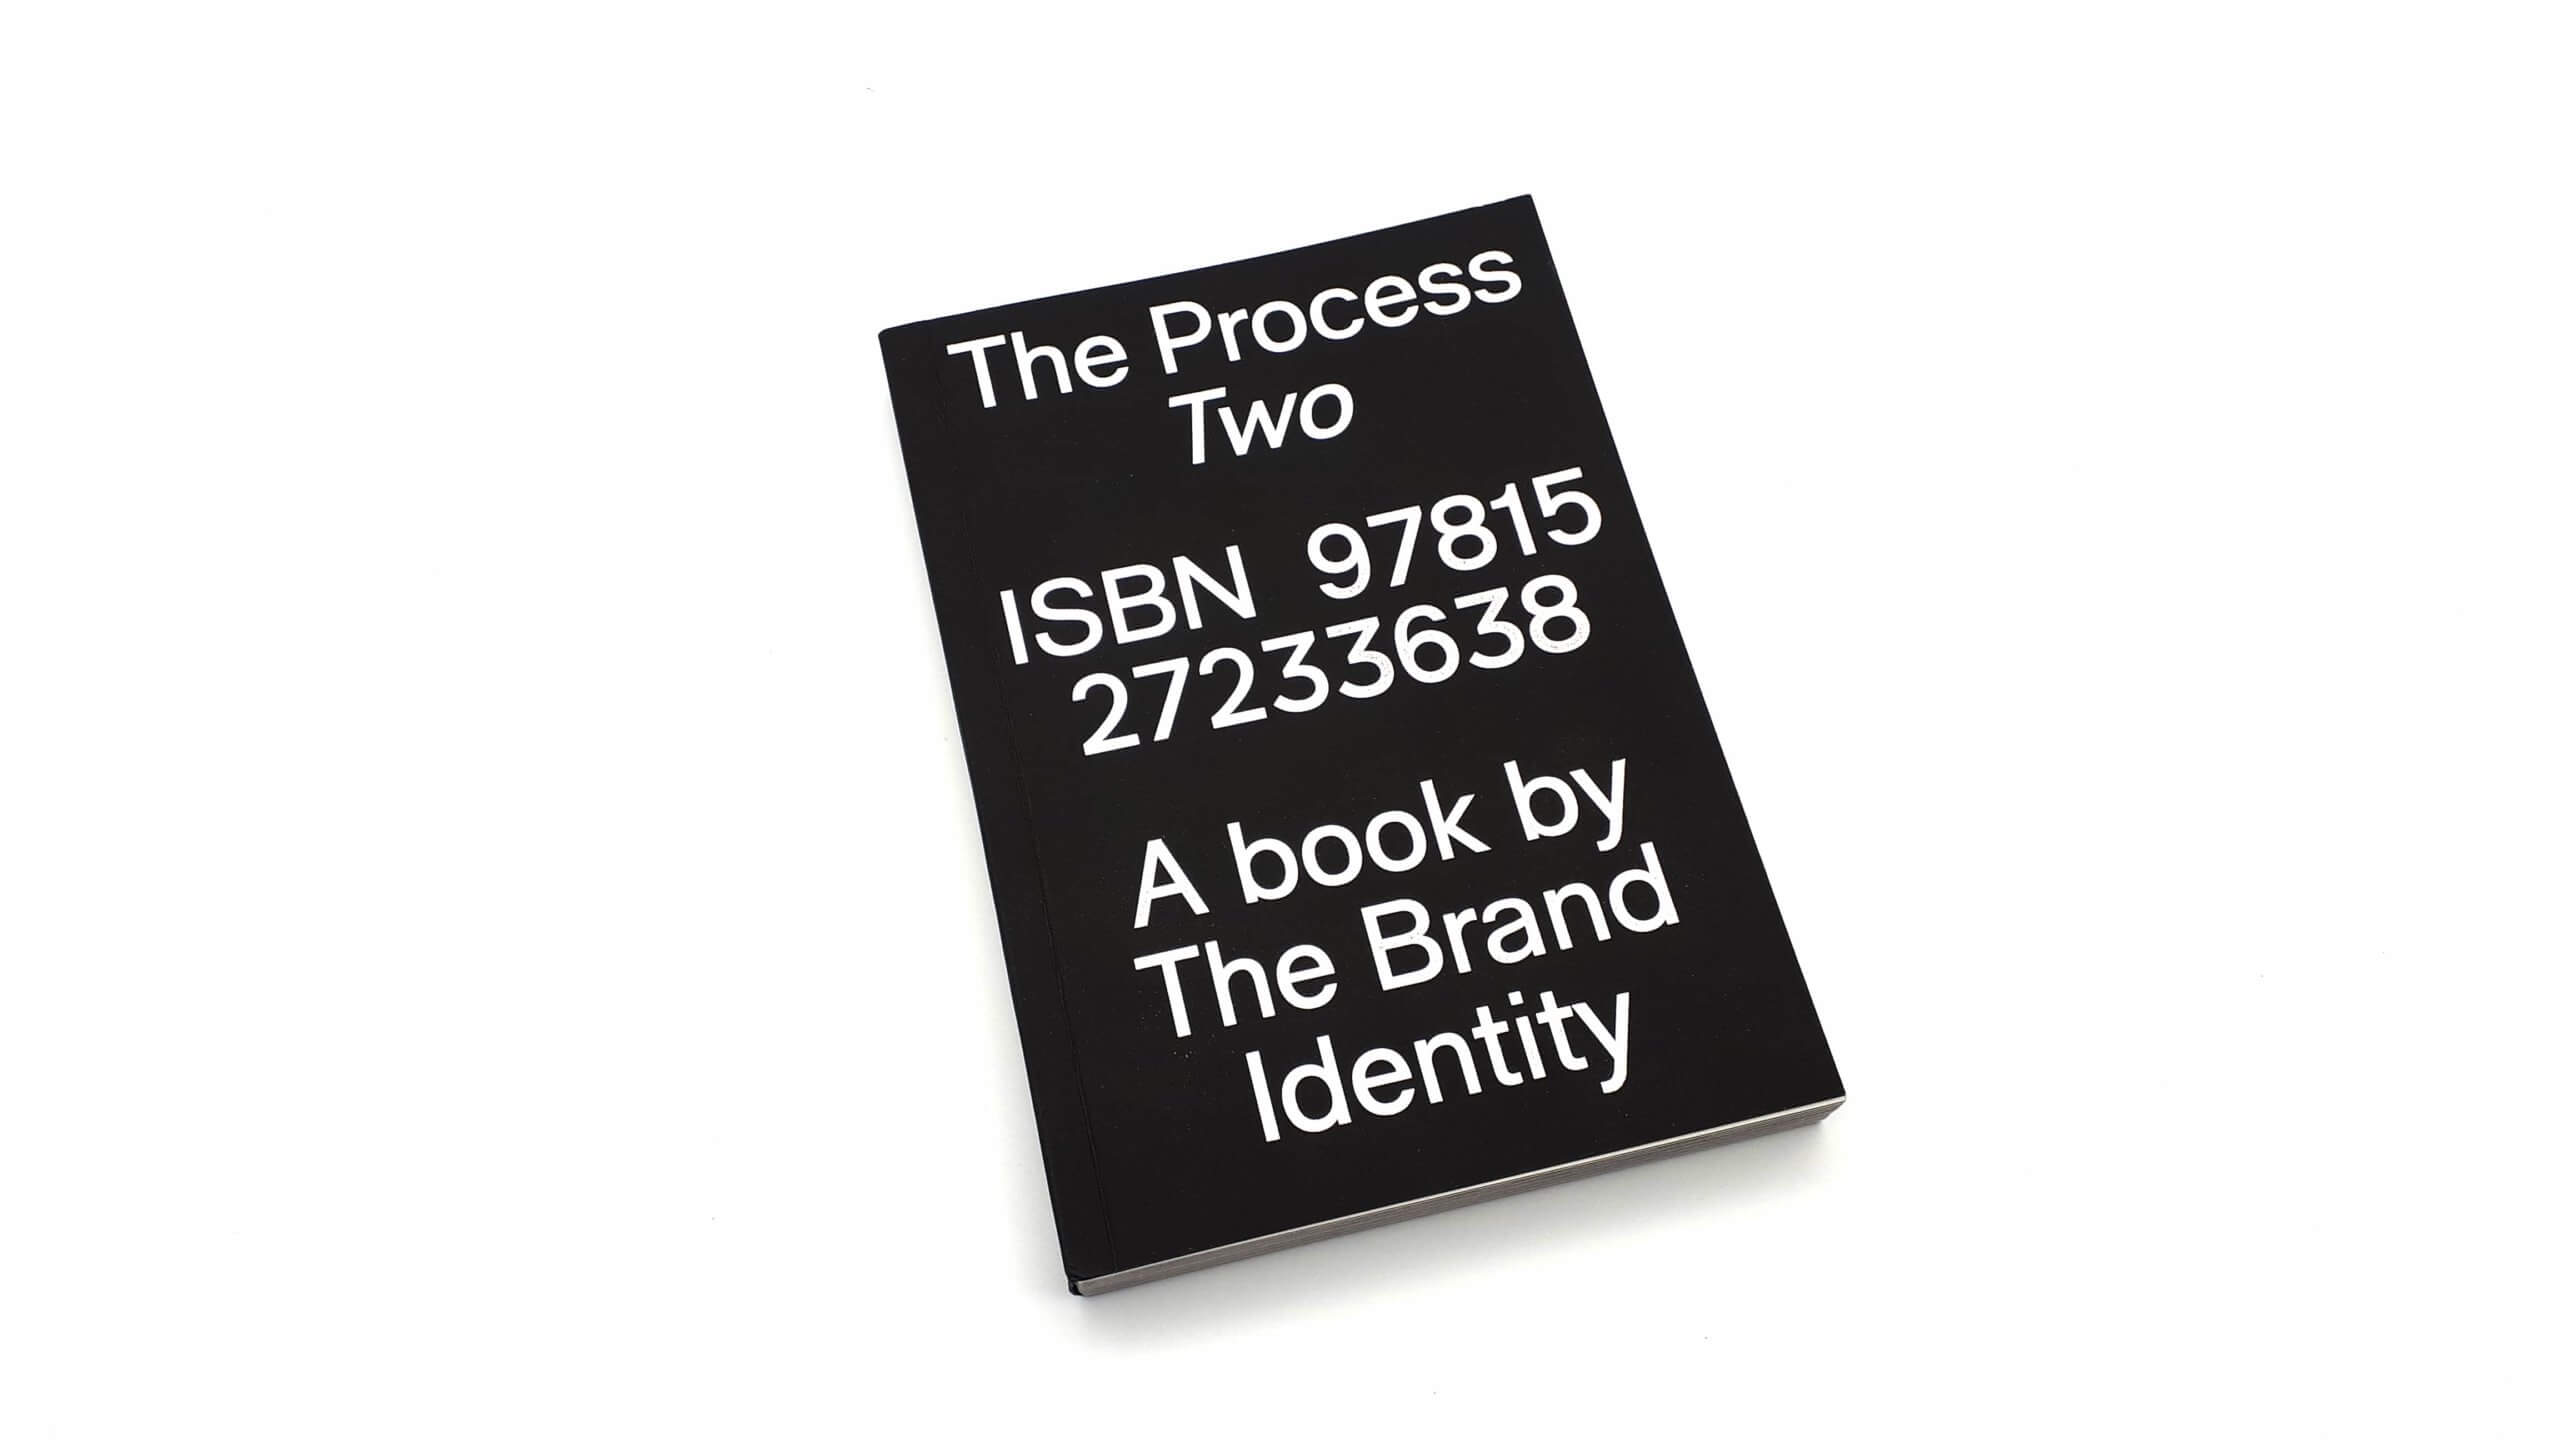 The Process Two by The Brand Identity - Book Review